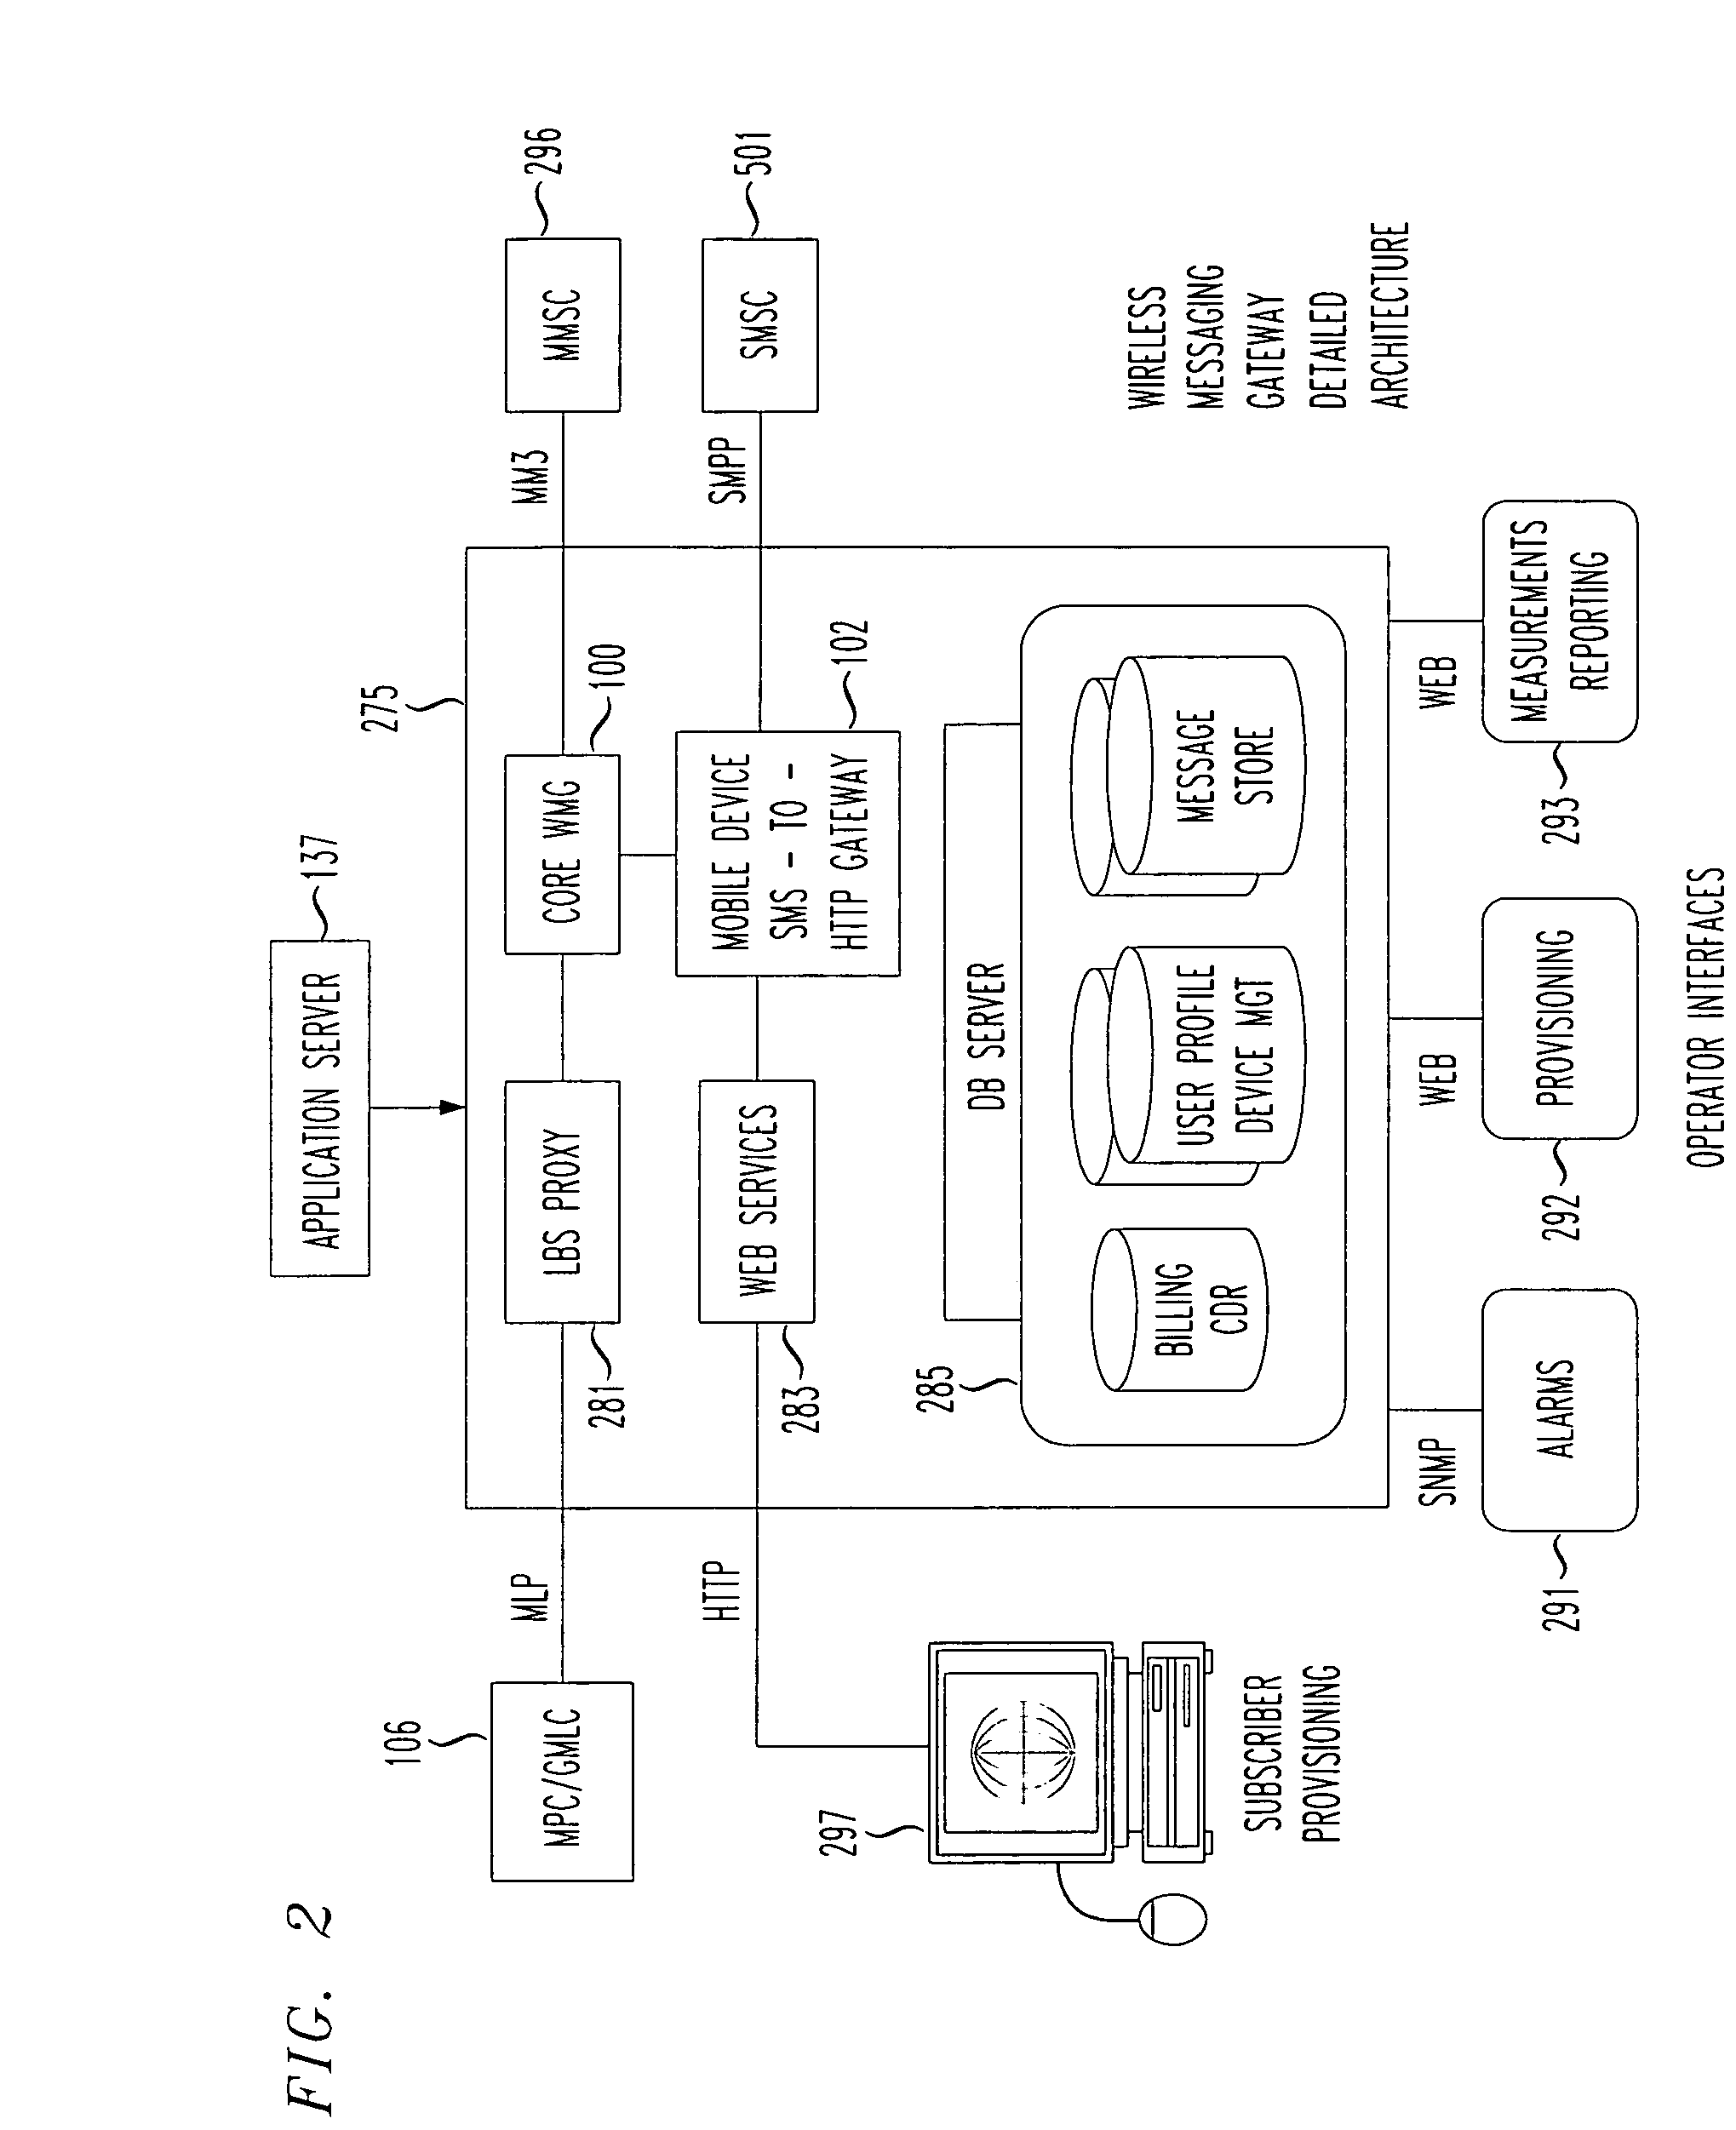 Short messaging system (SMS) proxy communications to enable location based services in wireless devices